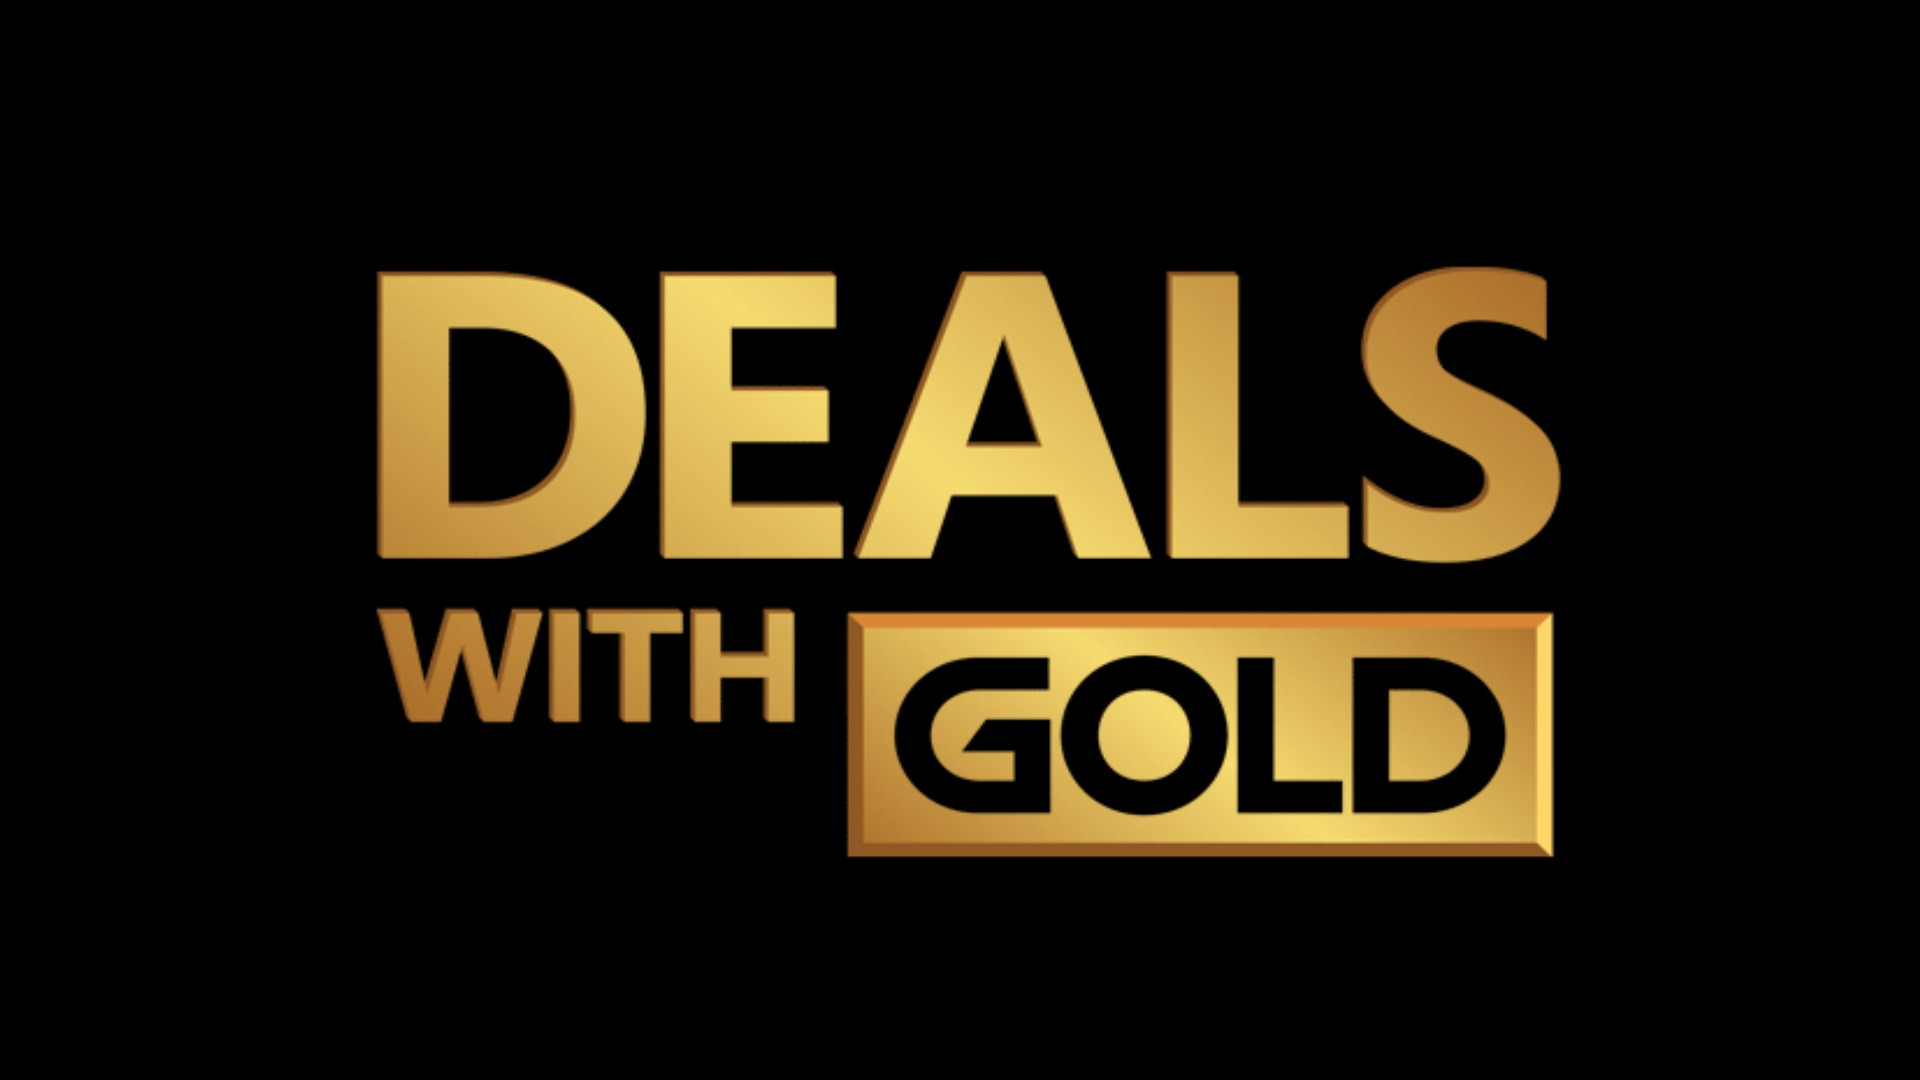 Deals with Gold semaine 16